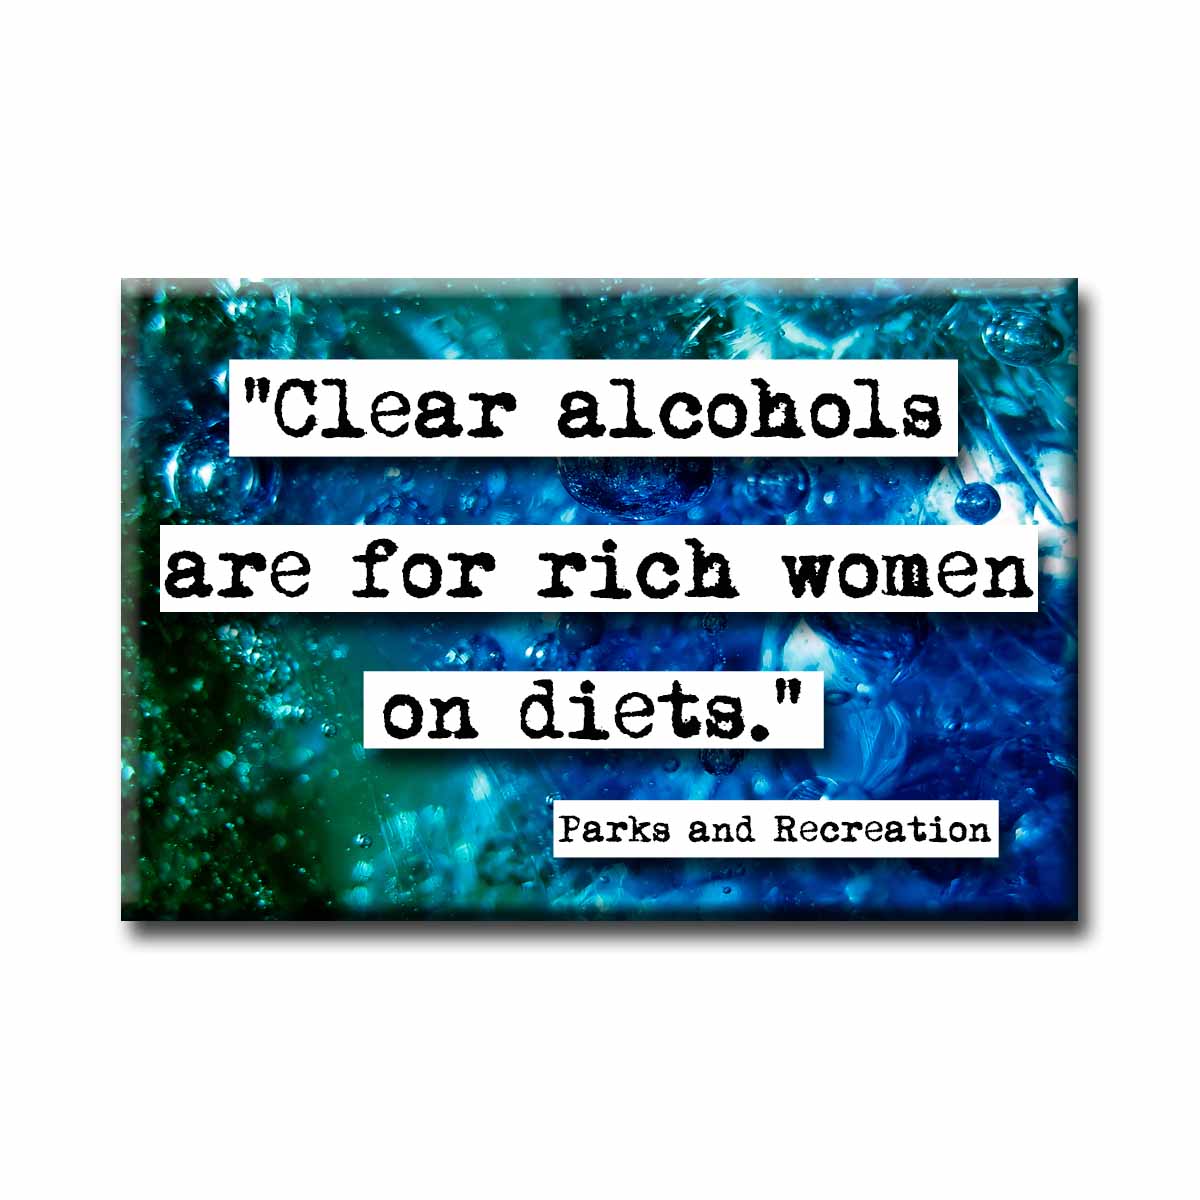 Parks and Recreation Clear Alcohol Quote Magnet (no.635)